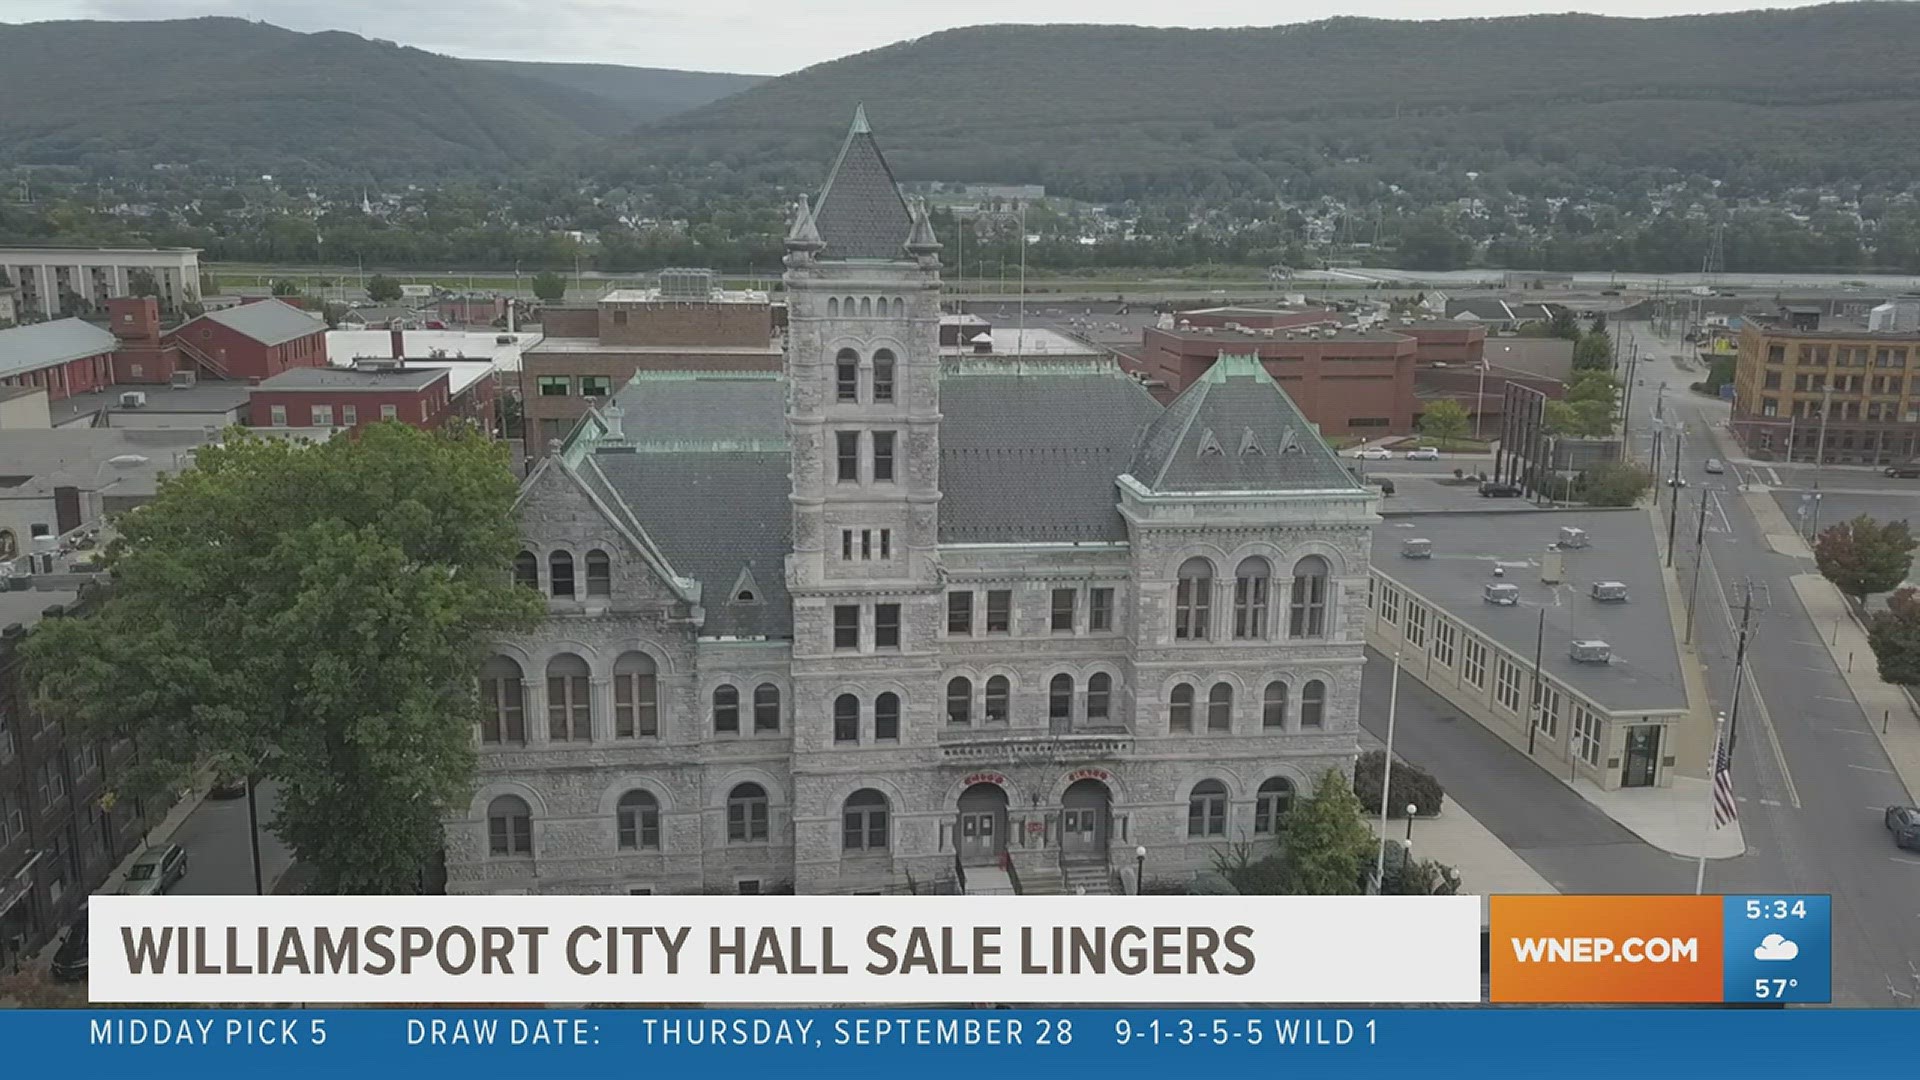 Council and city officials disagree over decision to push potential sale of condemned city hall building to local realty company